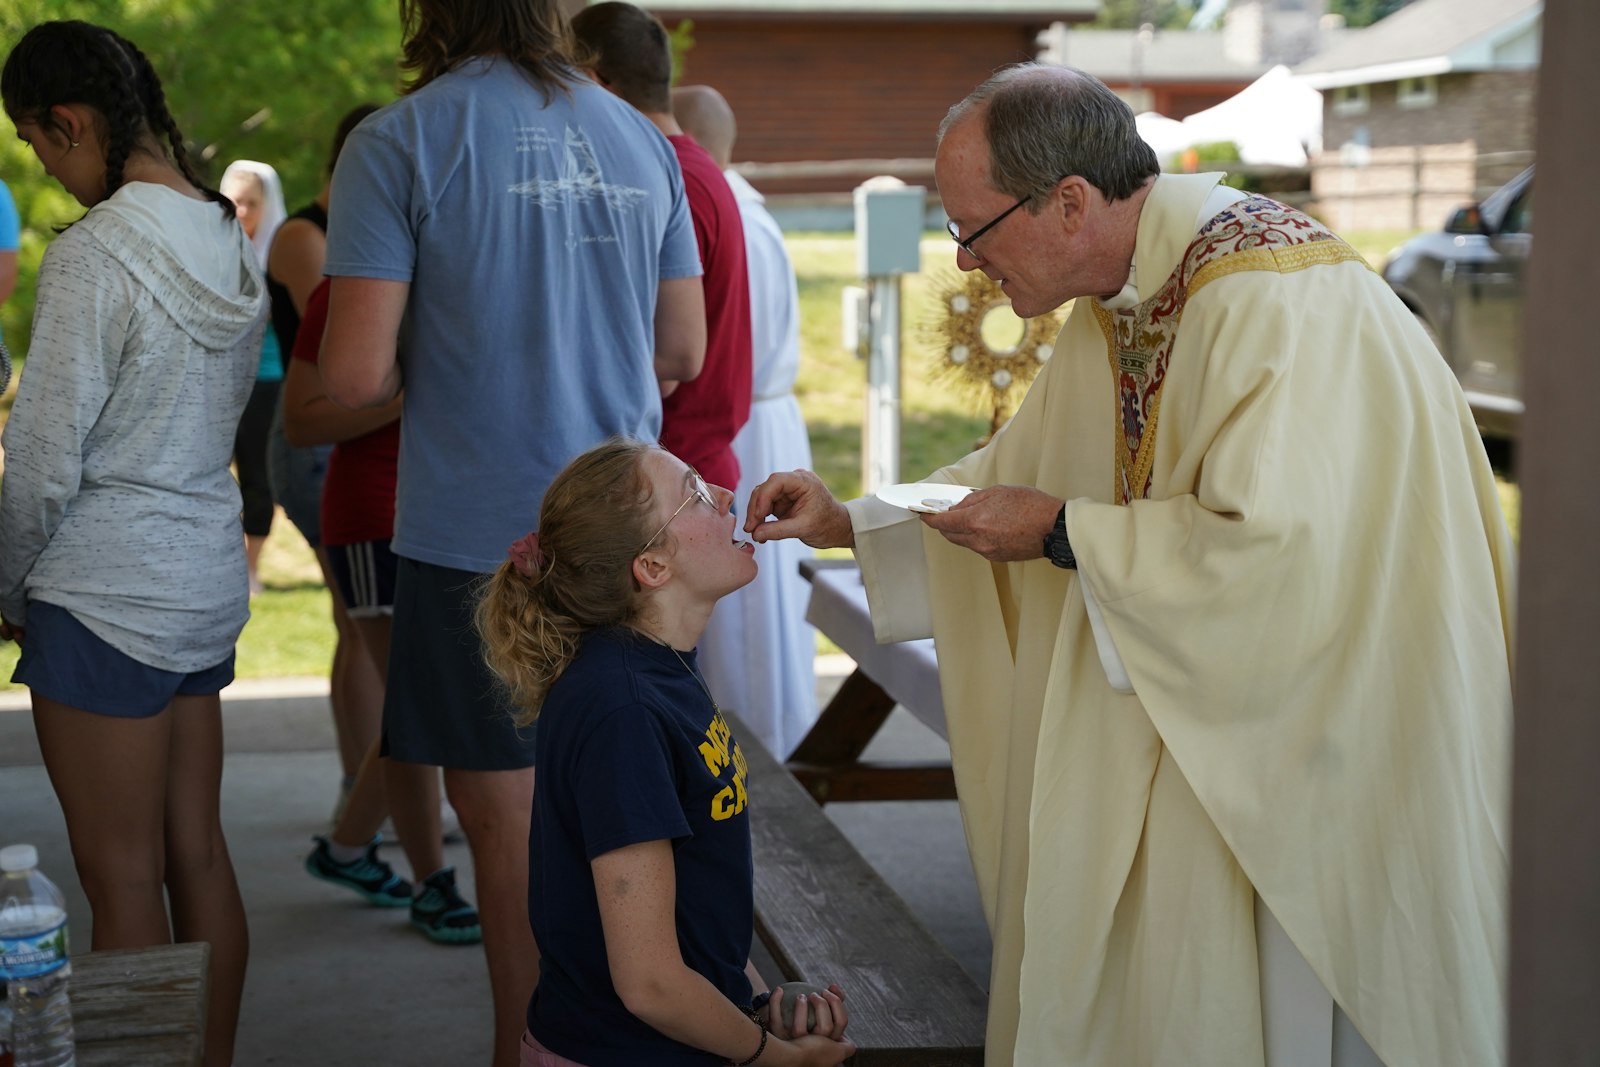 Bishop Walsh distributes Communion during the Saturday Mass in Indian River following the pilgrims' 8.5-mile hike. Bishop Walsh encouraged the young adults on the retreat to emulate St. Mary Magdalene in fulfilling the "kerygma" and pronouncing the Gospel of Jesus Christ.